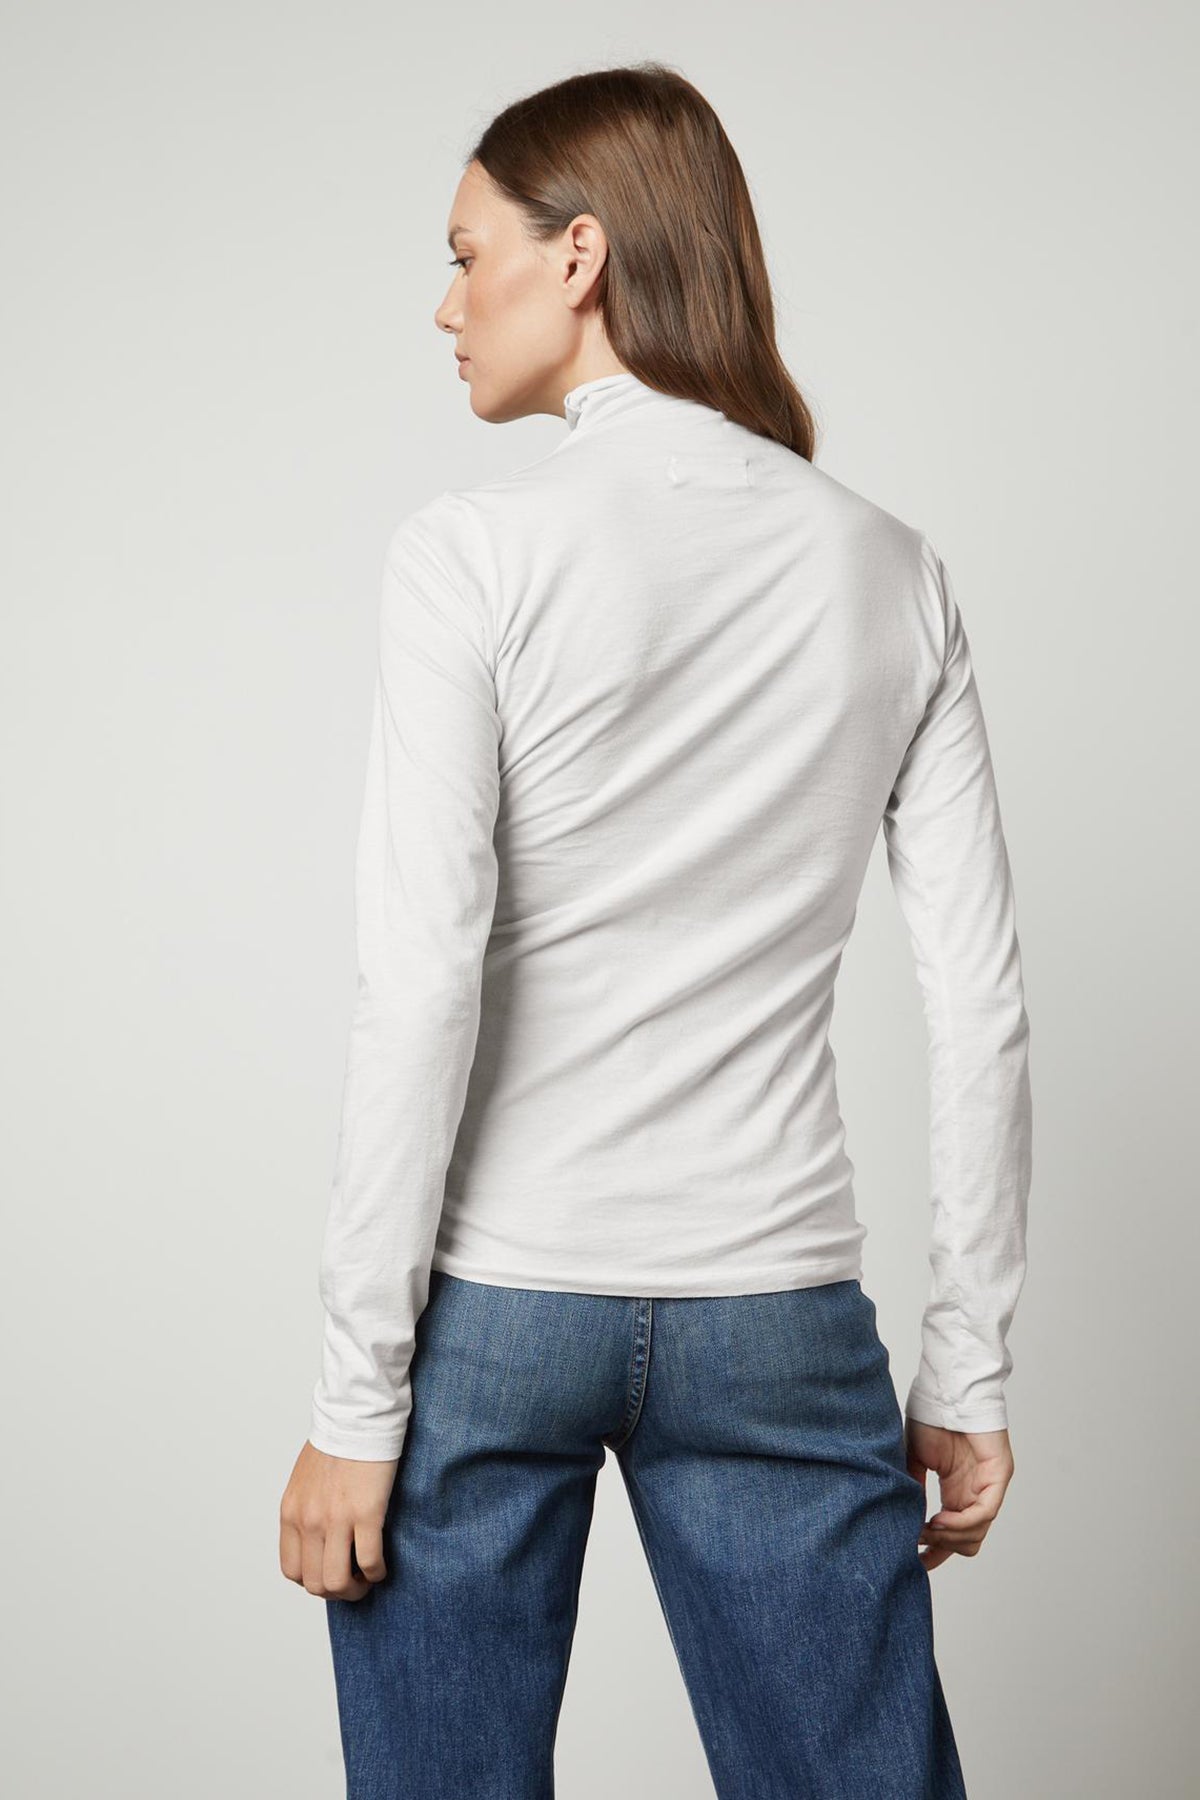   The versatile fashion world embraces the back view of a woman wearing Velvet by Graham & Spencer's TALISIA GAUZY WHISPER FITTED MOCK NECK TEE jeans and a white long-sleeved shirt. 